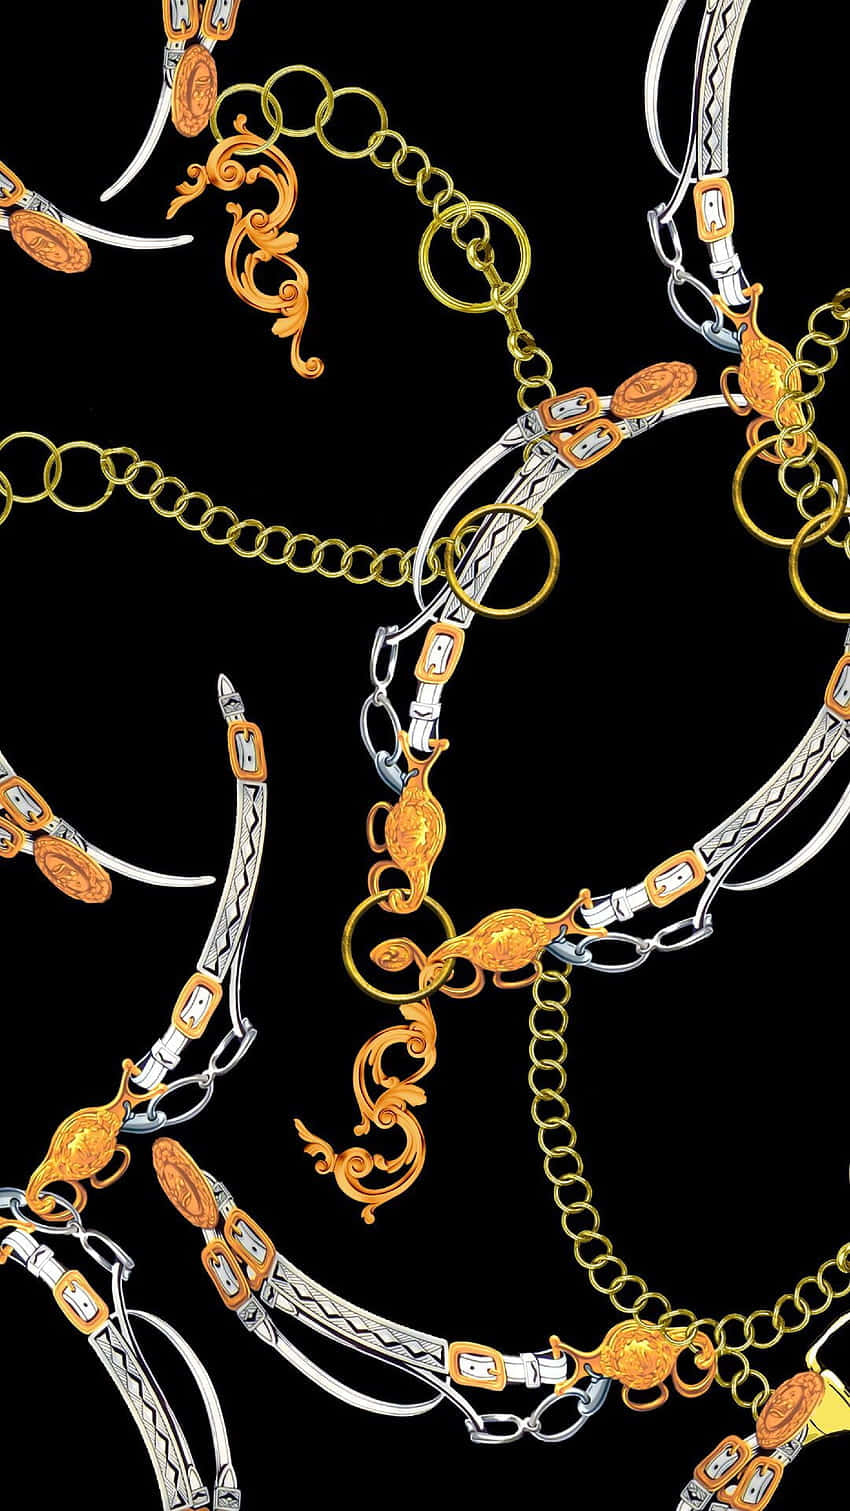 A Pattern Of Gold Chains And Chains Wallpaper